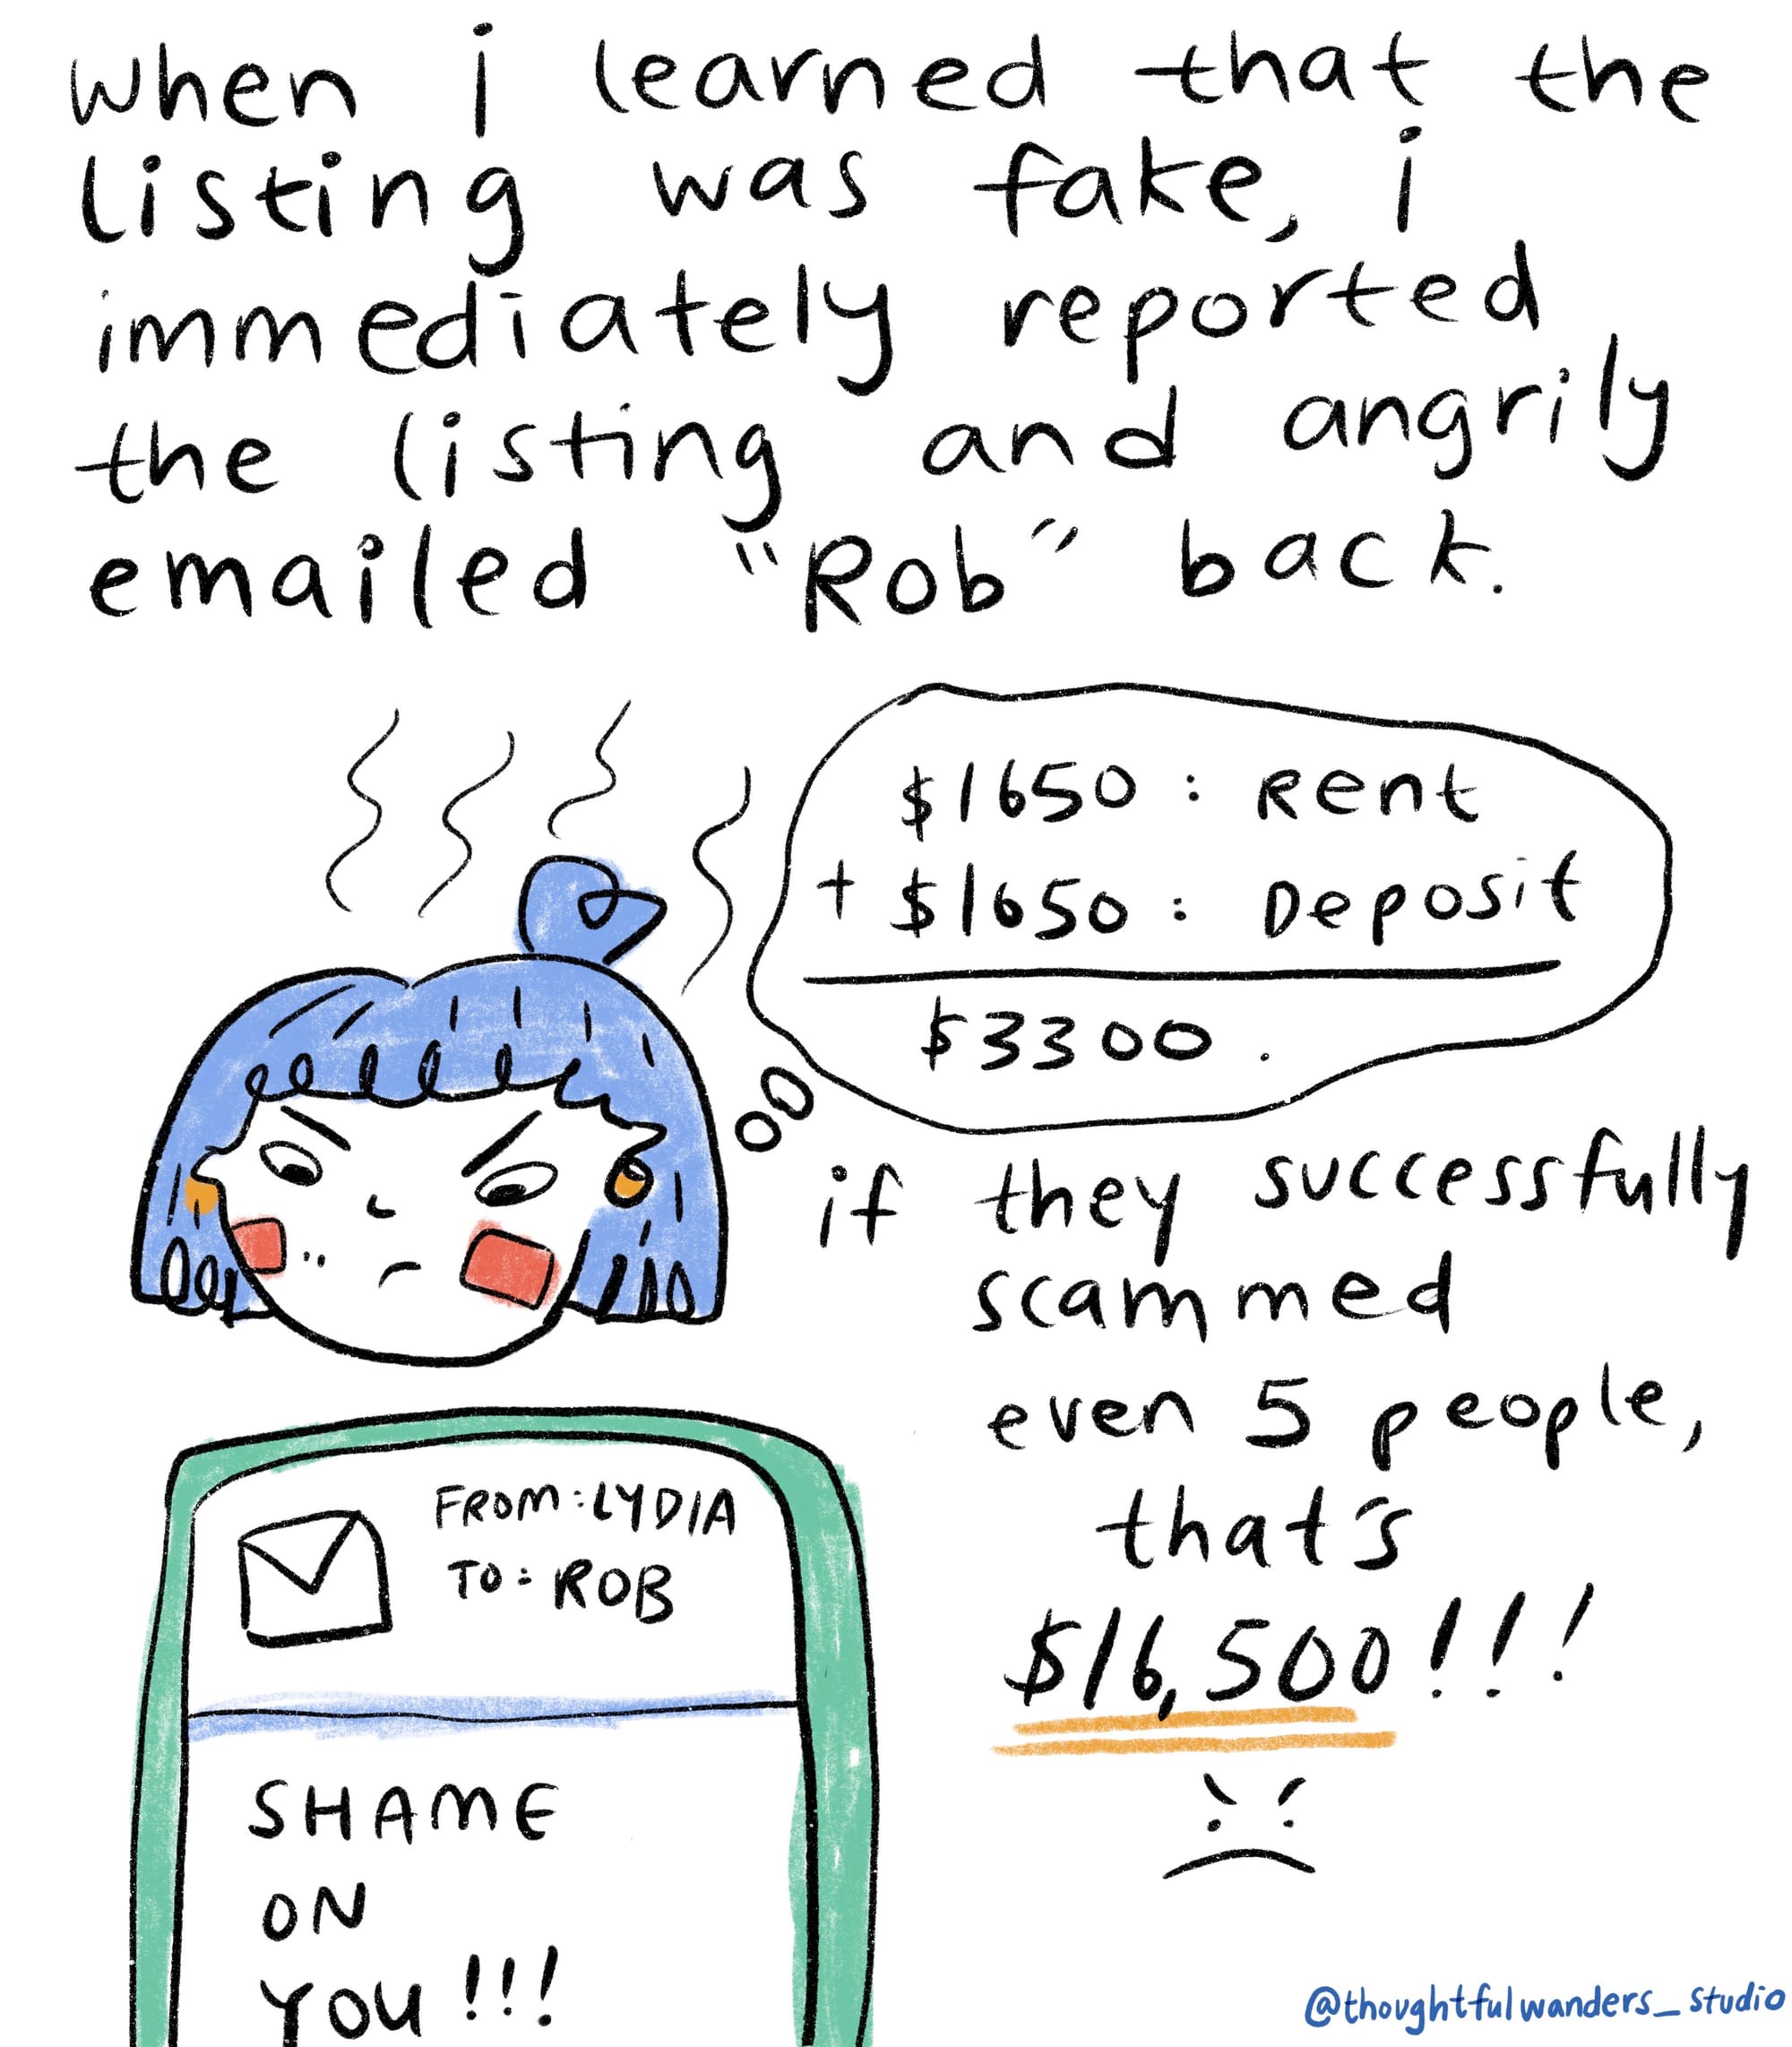 when i learned that the listing was fake, I immediately reported the listing and angrily emailed "rob back". me angrily calculating the deposit and rent 1650+1650 = 3300. if they successfully scammed even 5 people, that's 16,500!! then me writing an email to the scammer "shame on you!"